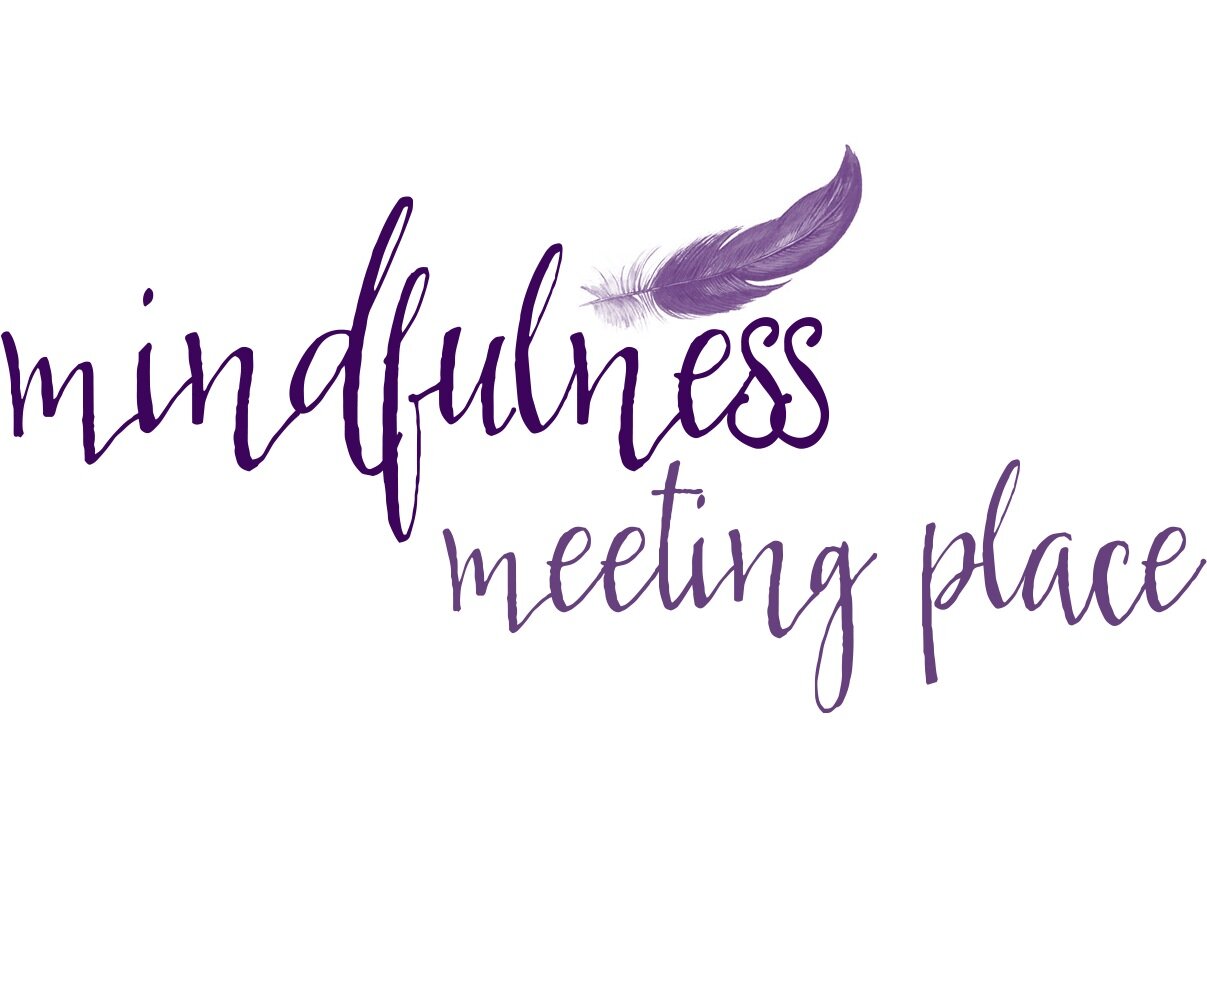 Mindfulness Meeting Place